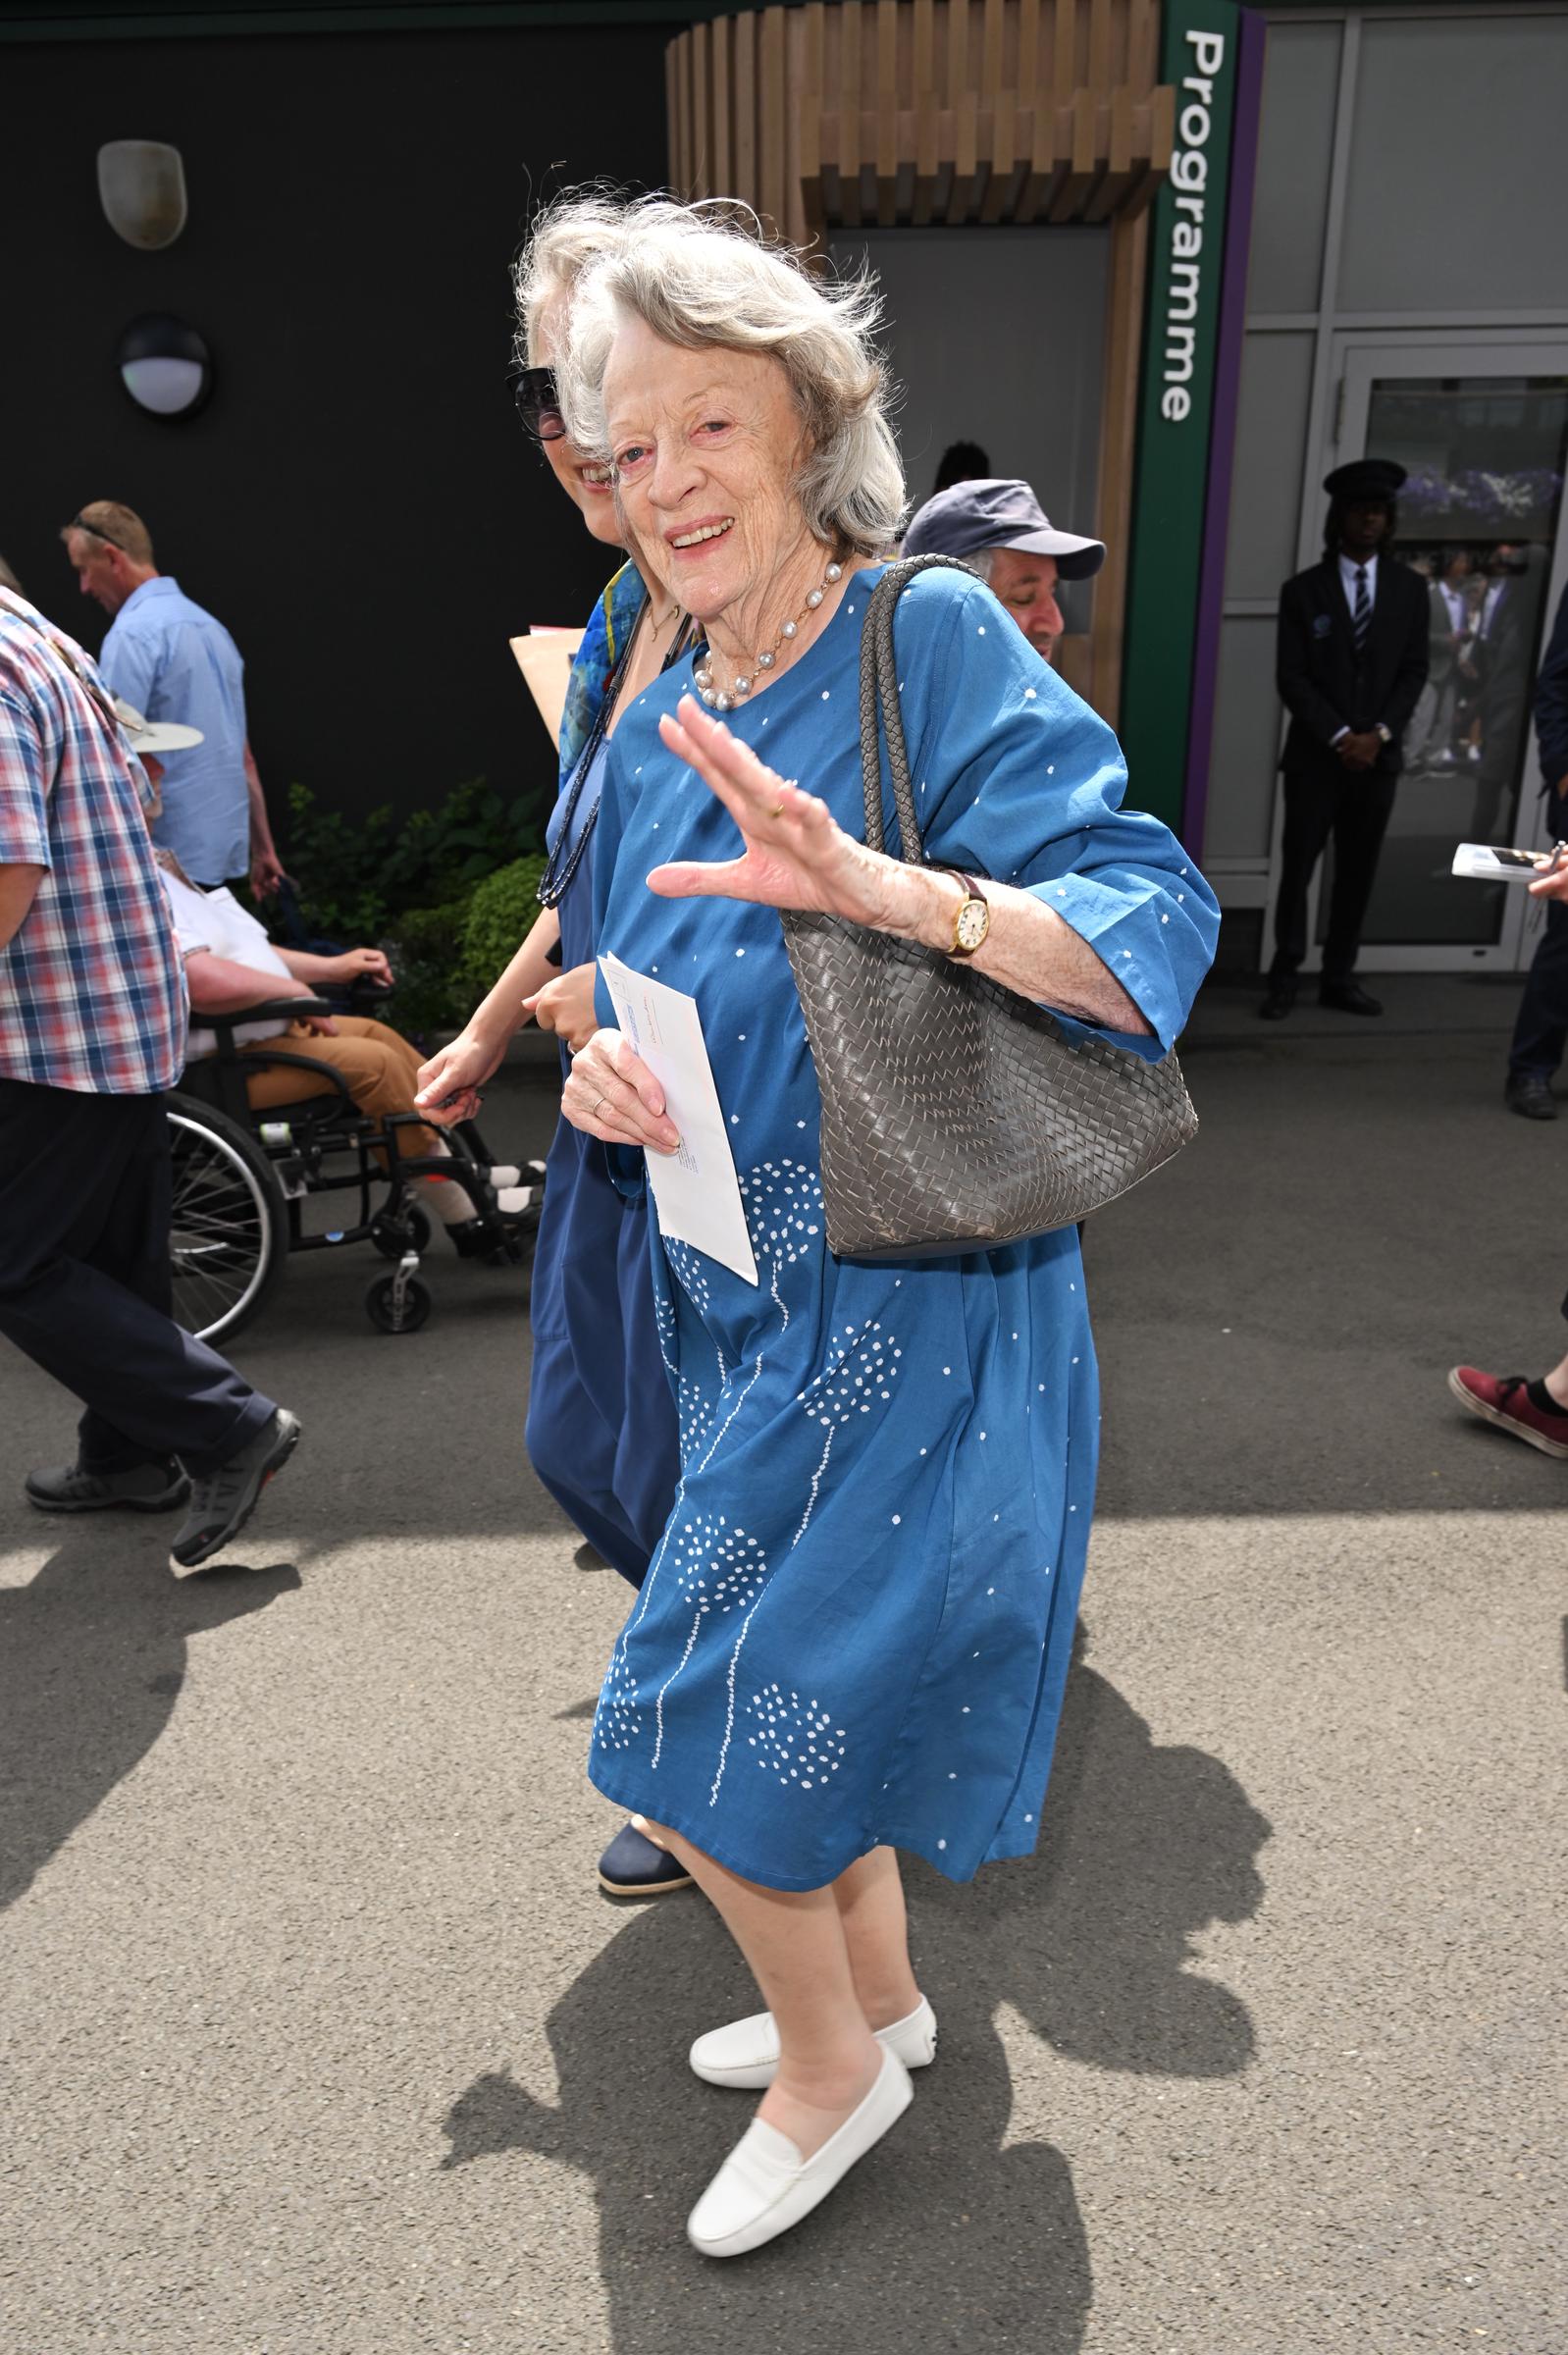 Maggie Smith im All England Lawn Tennis and Croquet Club am 9. Juli 2022 in London, England. | Quelle: Getty Images